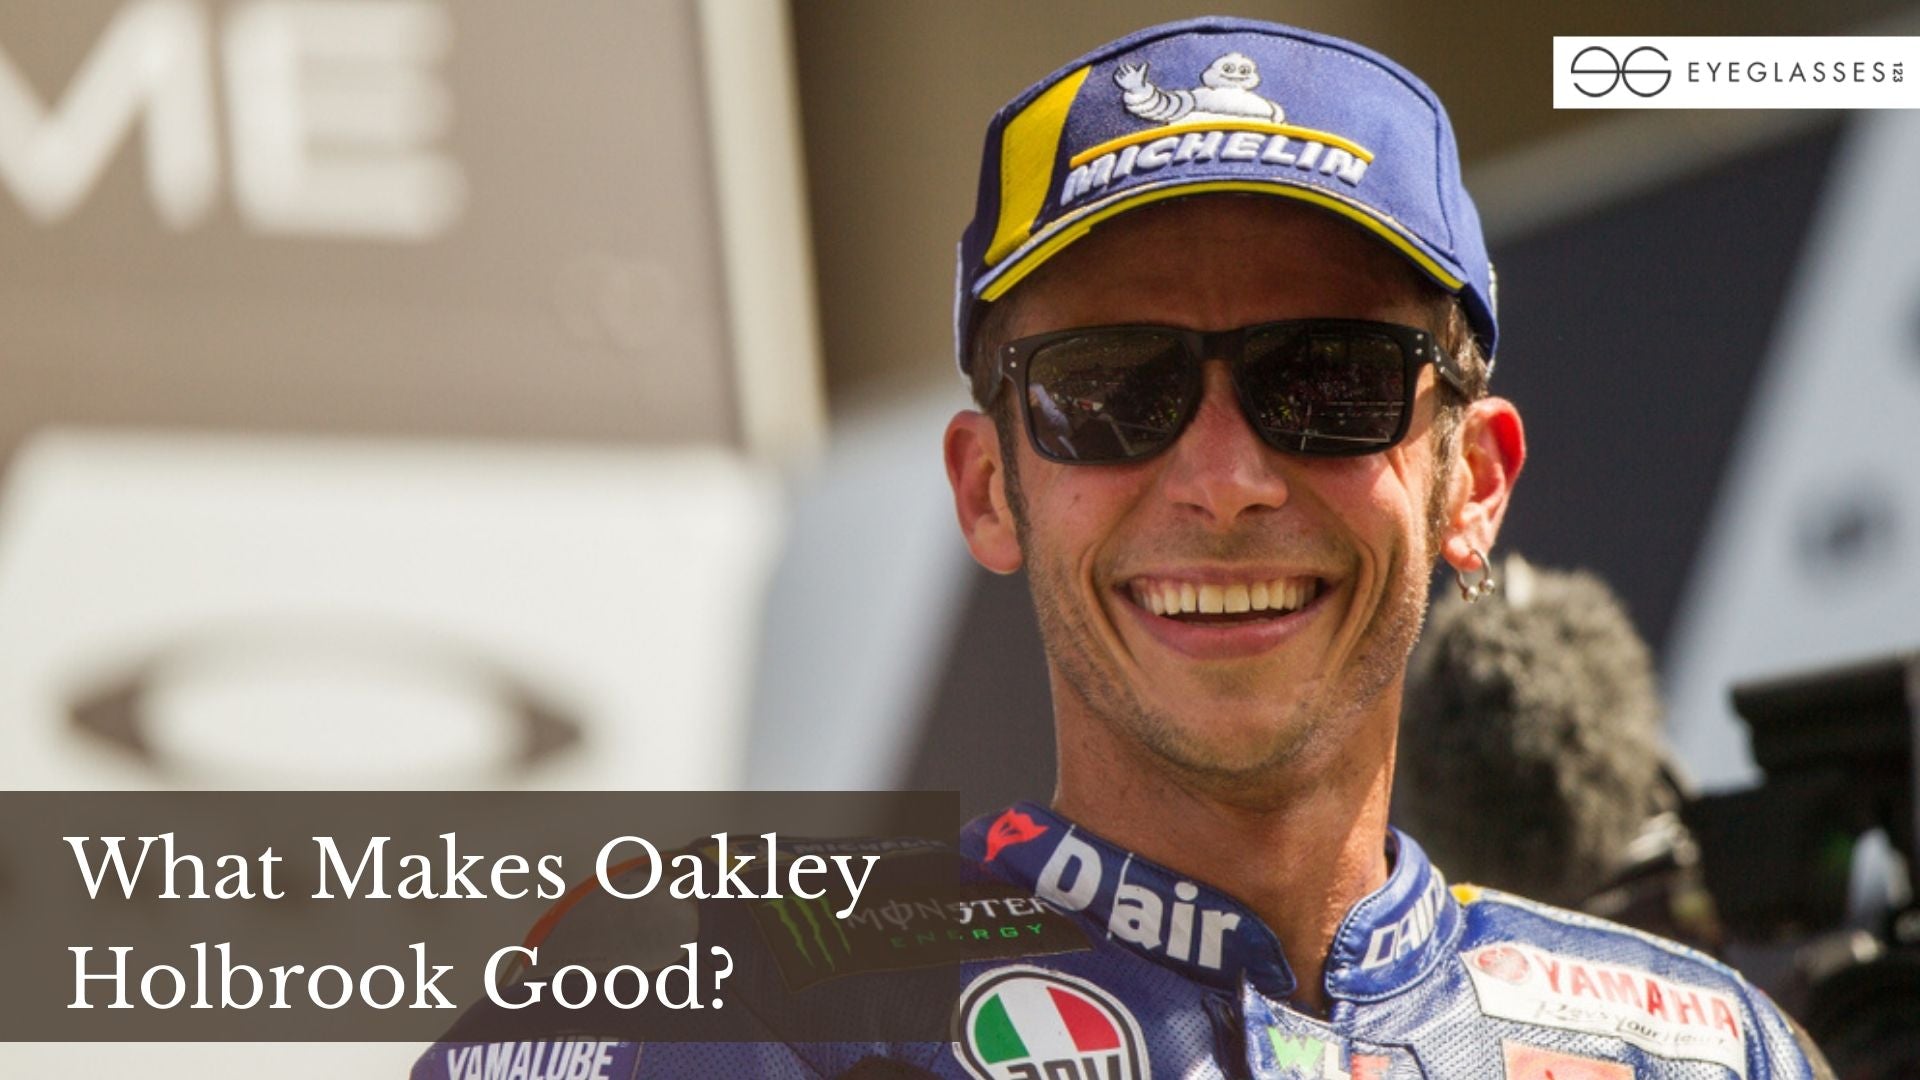 What Makes Oakley Good?